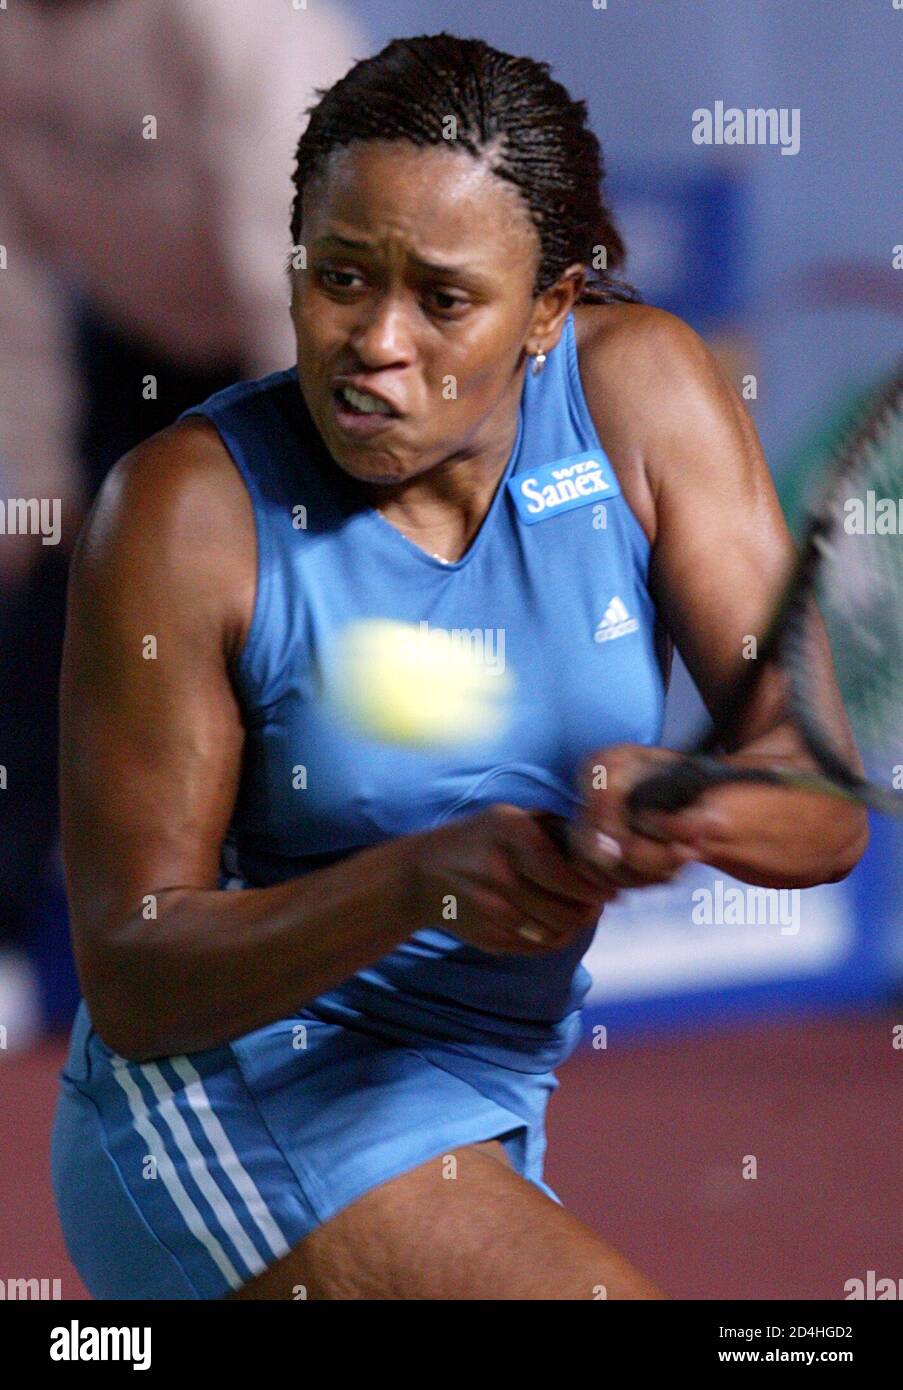 Chanda Rubin of the United States returns a shot during her match against Anastasia Myskina of Russia at the Hong Kong Ladies Tennis Challenge January 3, 2003. Rubin won 6-4 6-3. REUTERS/Kin Cheung  KC/CRB Stock Photo